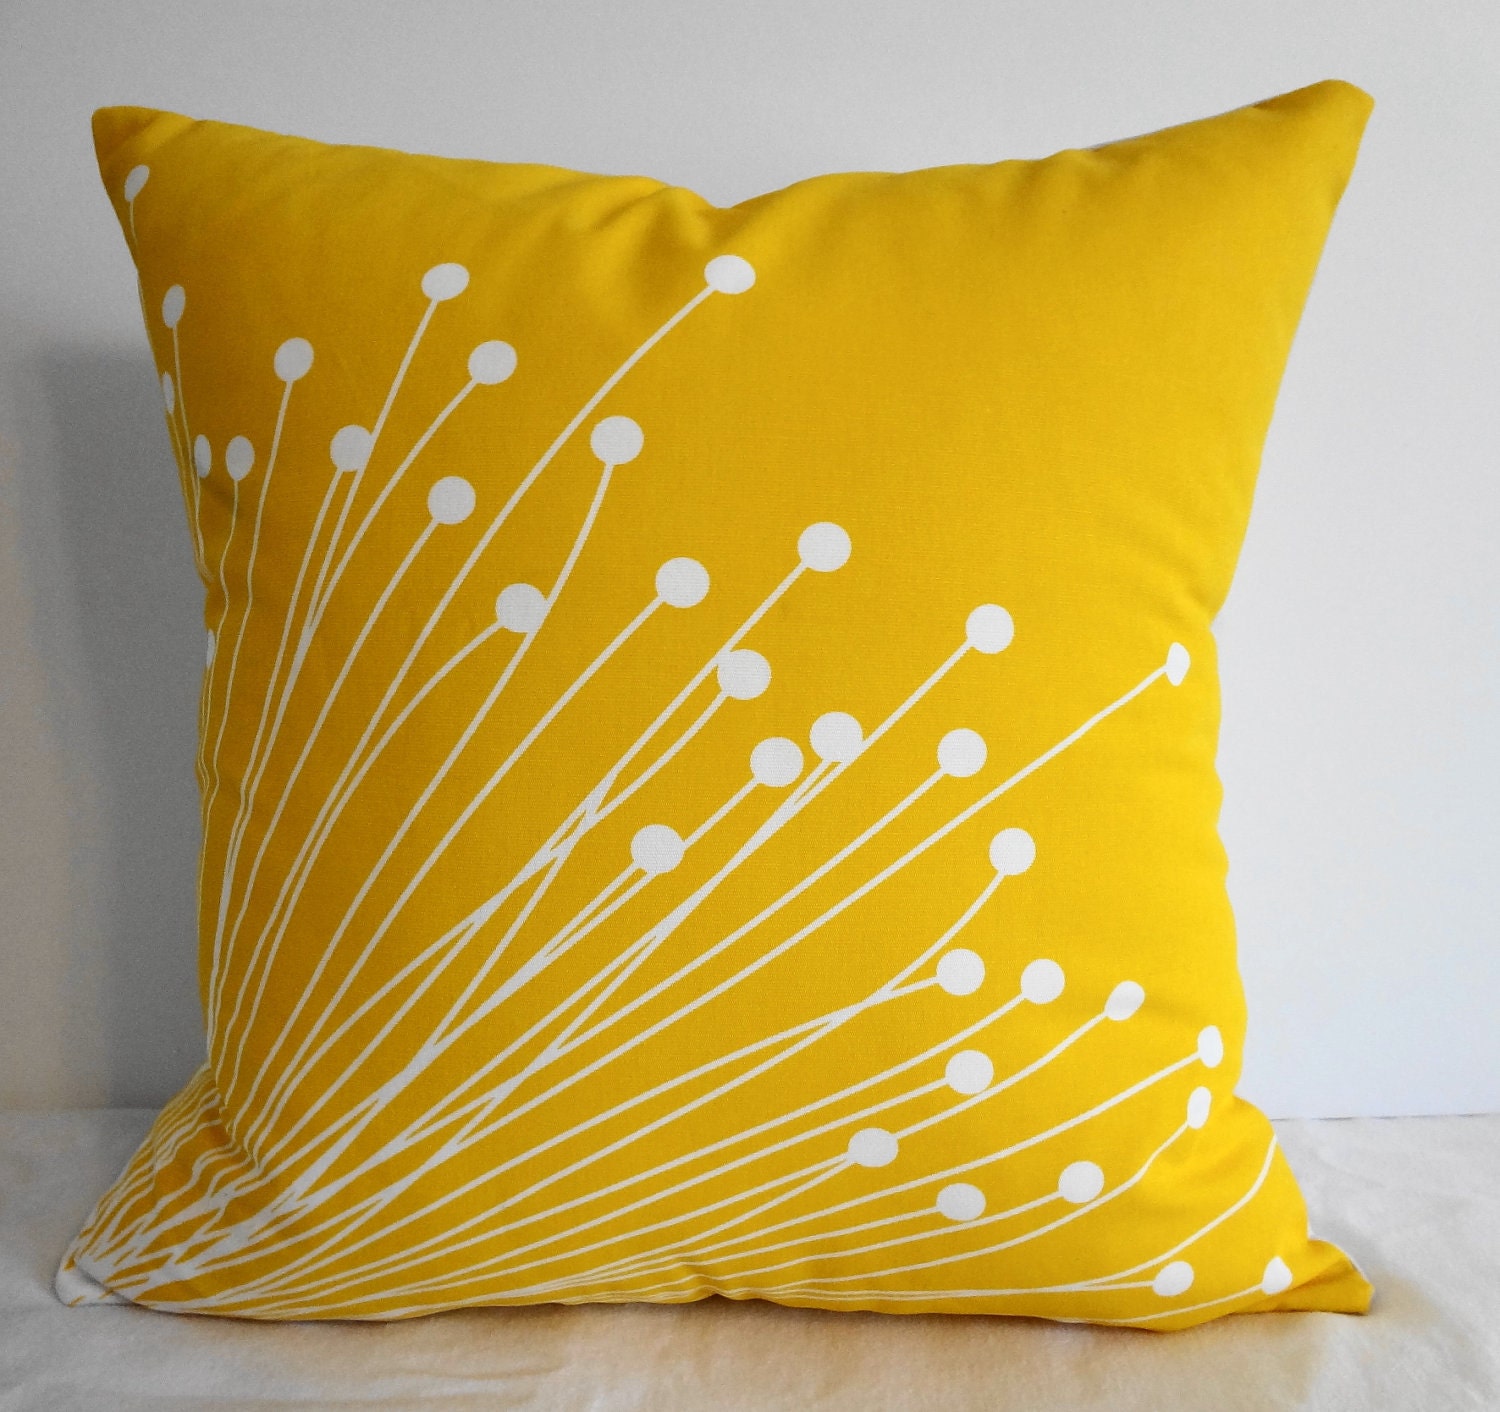 Starburst Yellow Pillow Covers Decorative Throw by pillows4fun